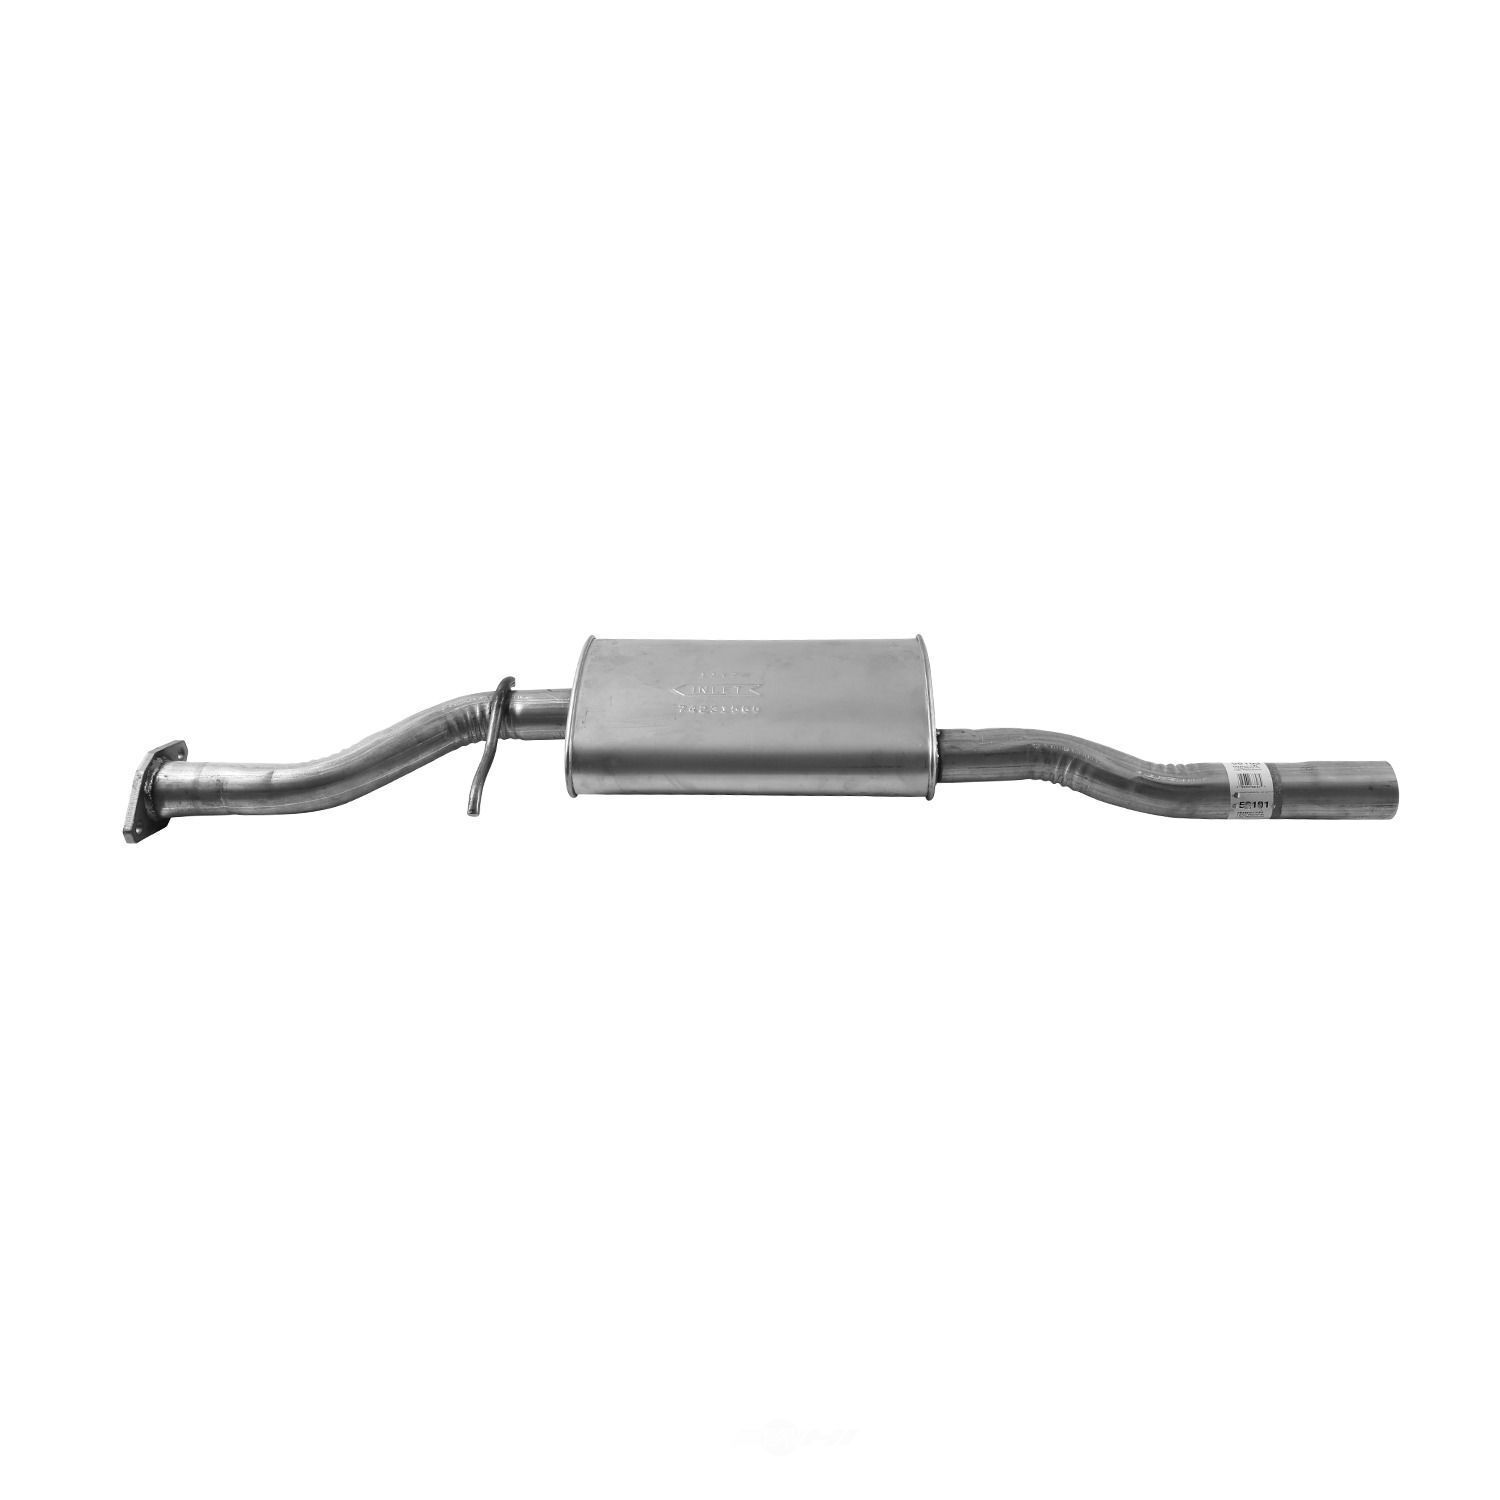 Exhaust Pipe AP Exhaust 58101 fits 07-15 Mazda CX-9 3.7L-V6